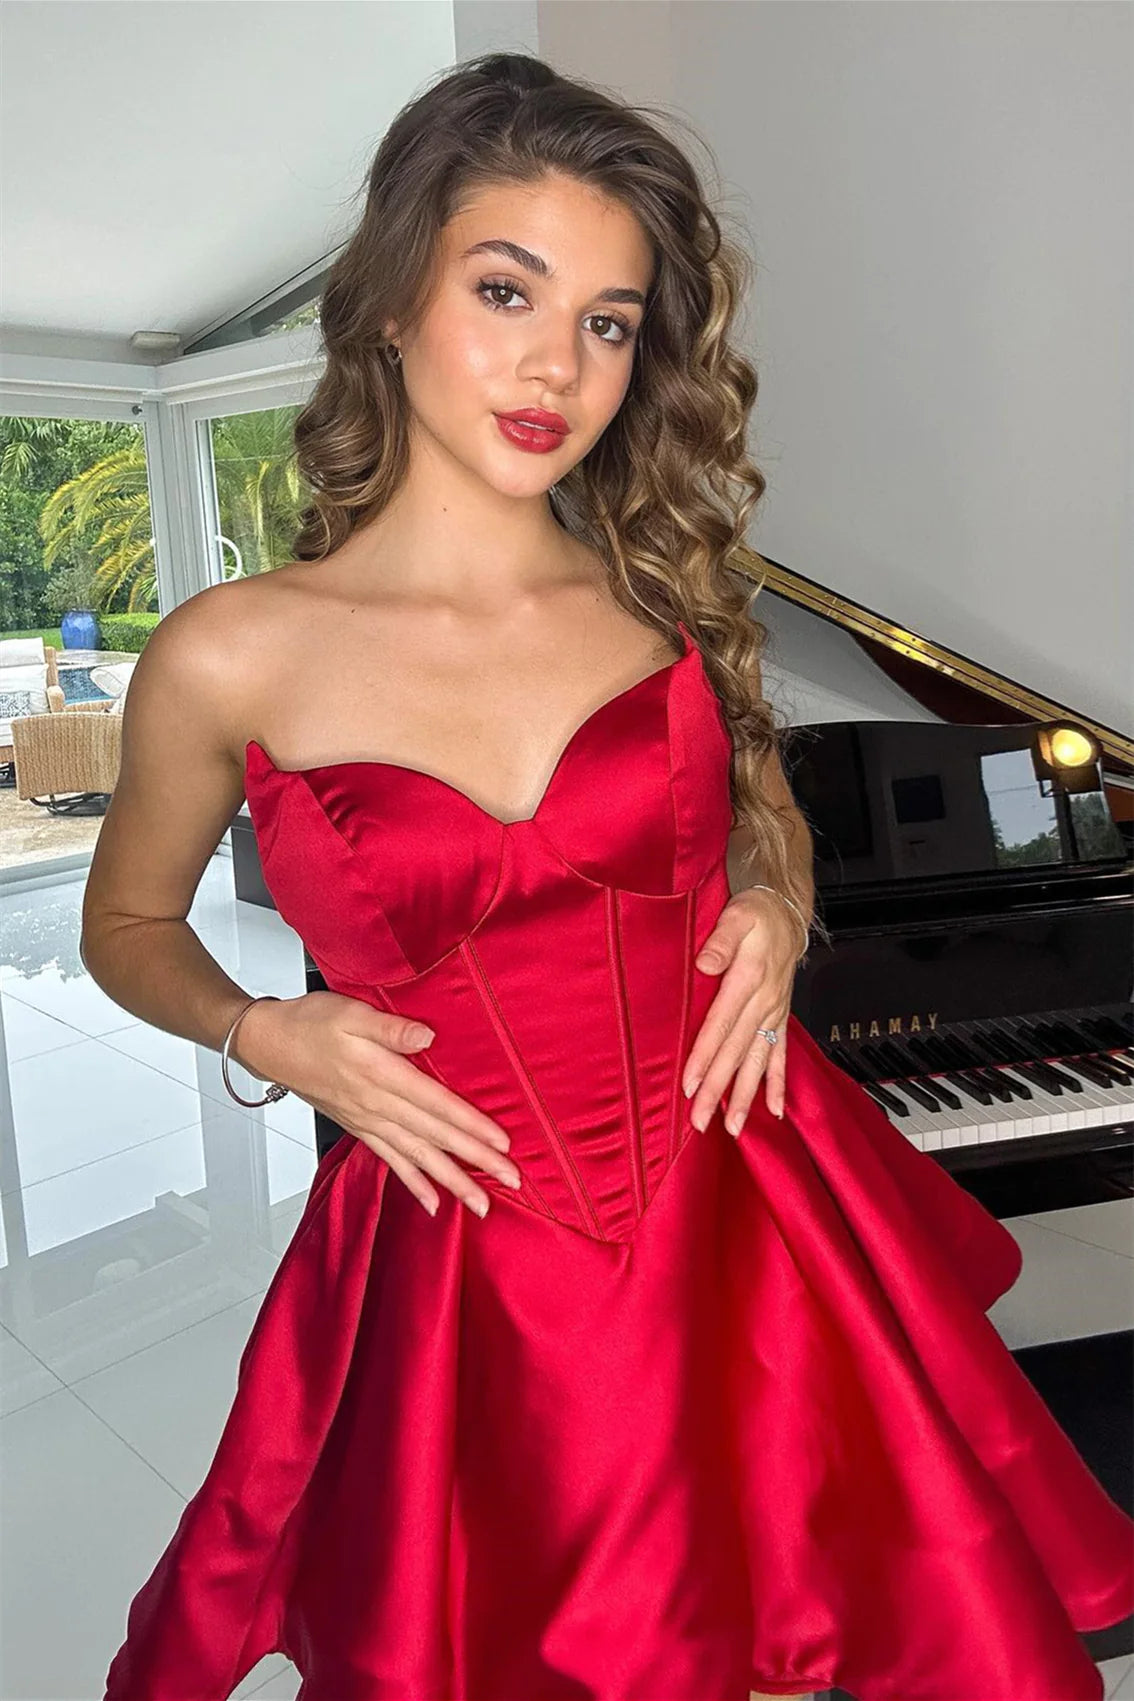 PM531,Sweetheart Red Satin A-Line Homecoming Dress, Mini Dance Gown